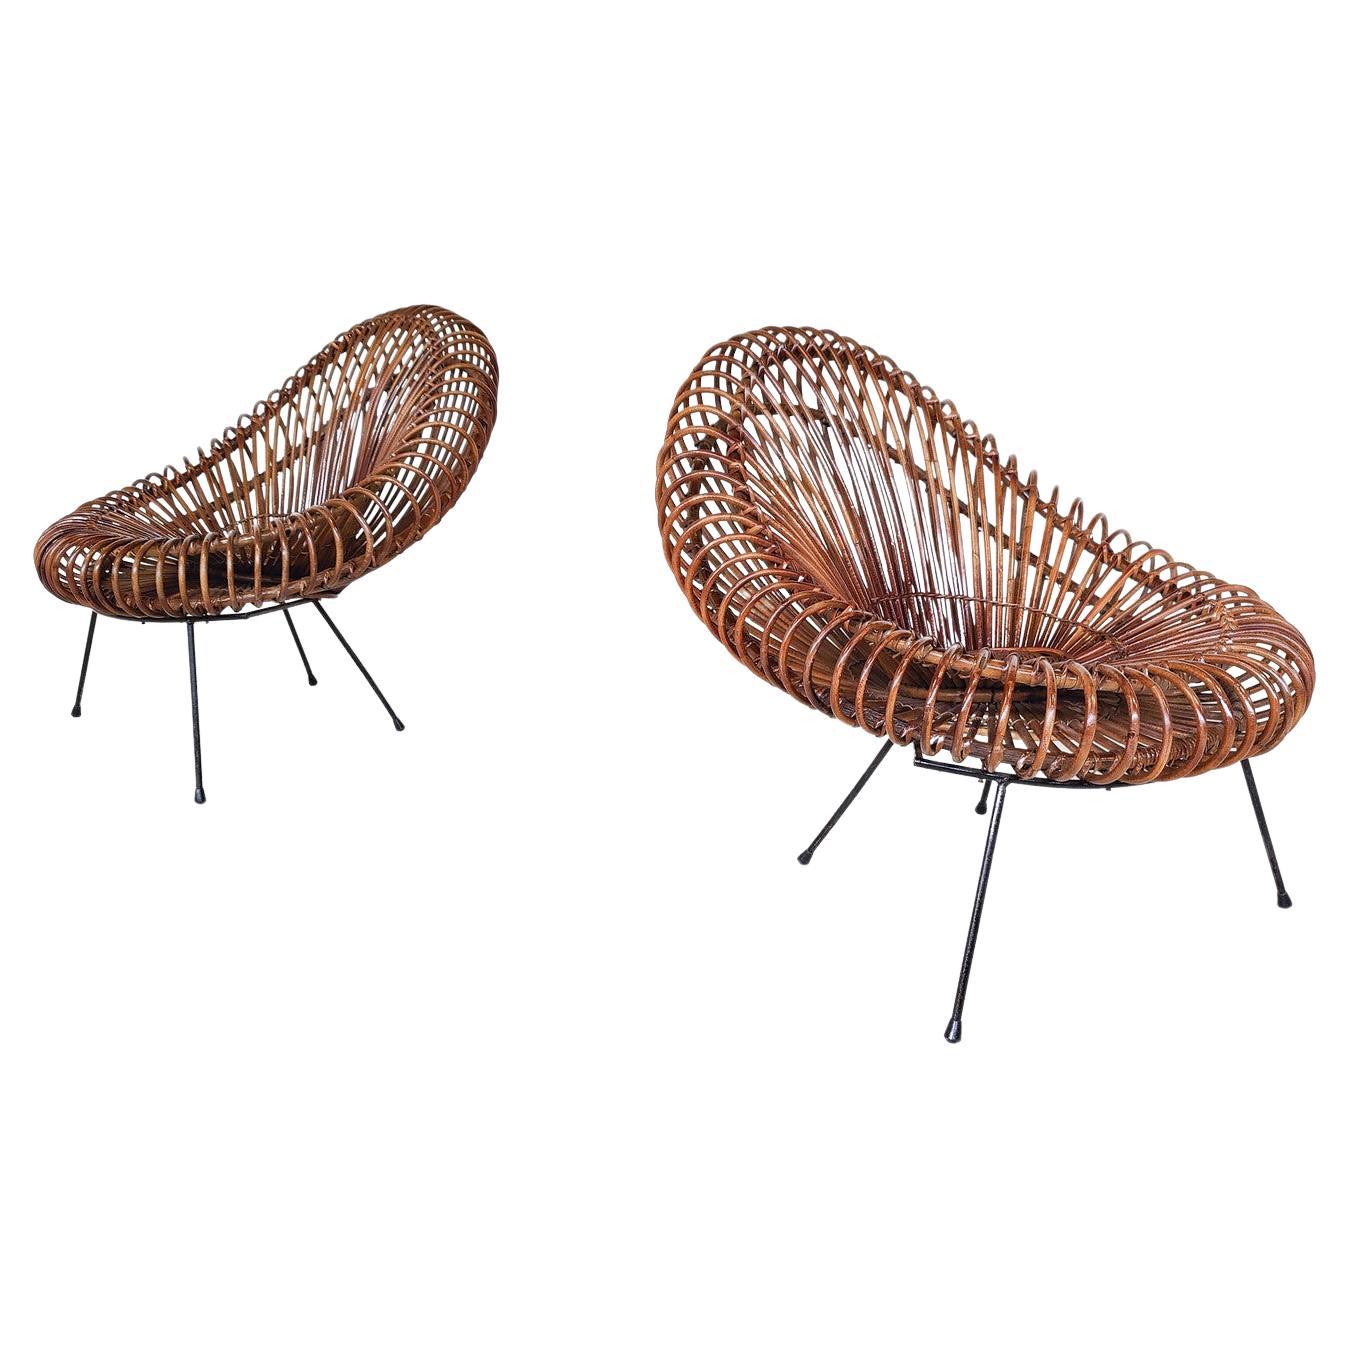 Mid-Century Modern Pair of Chairs by Janine Abraham & Dirk Jan Rol for Rougier 